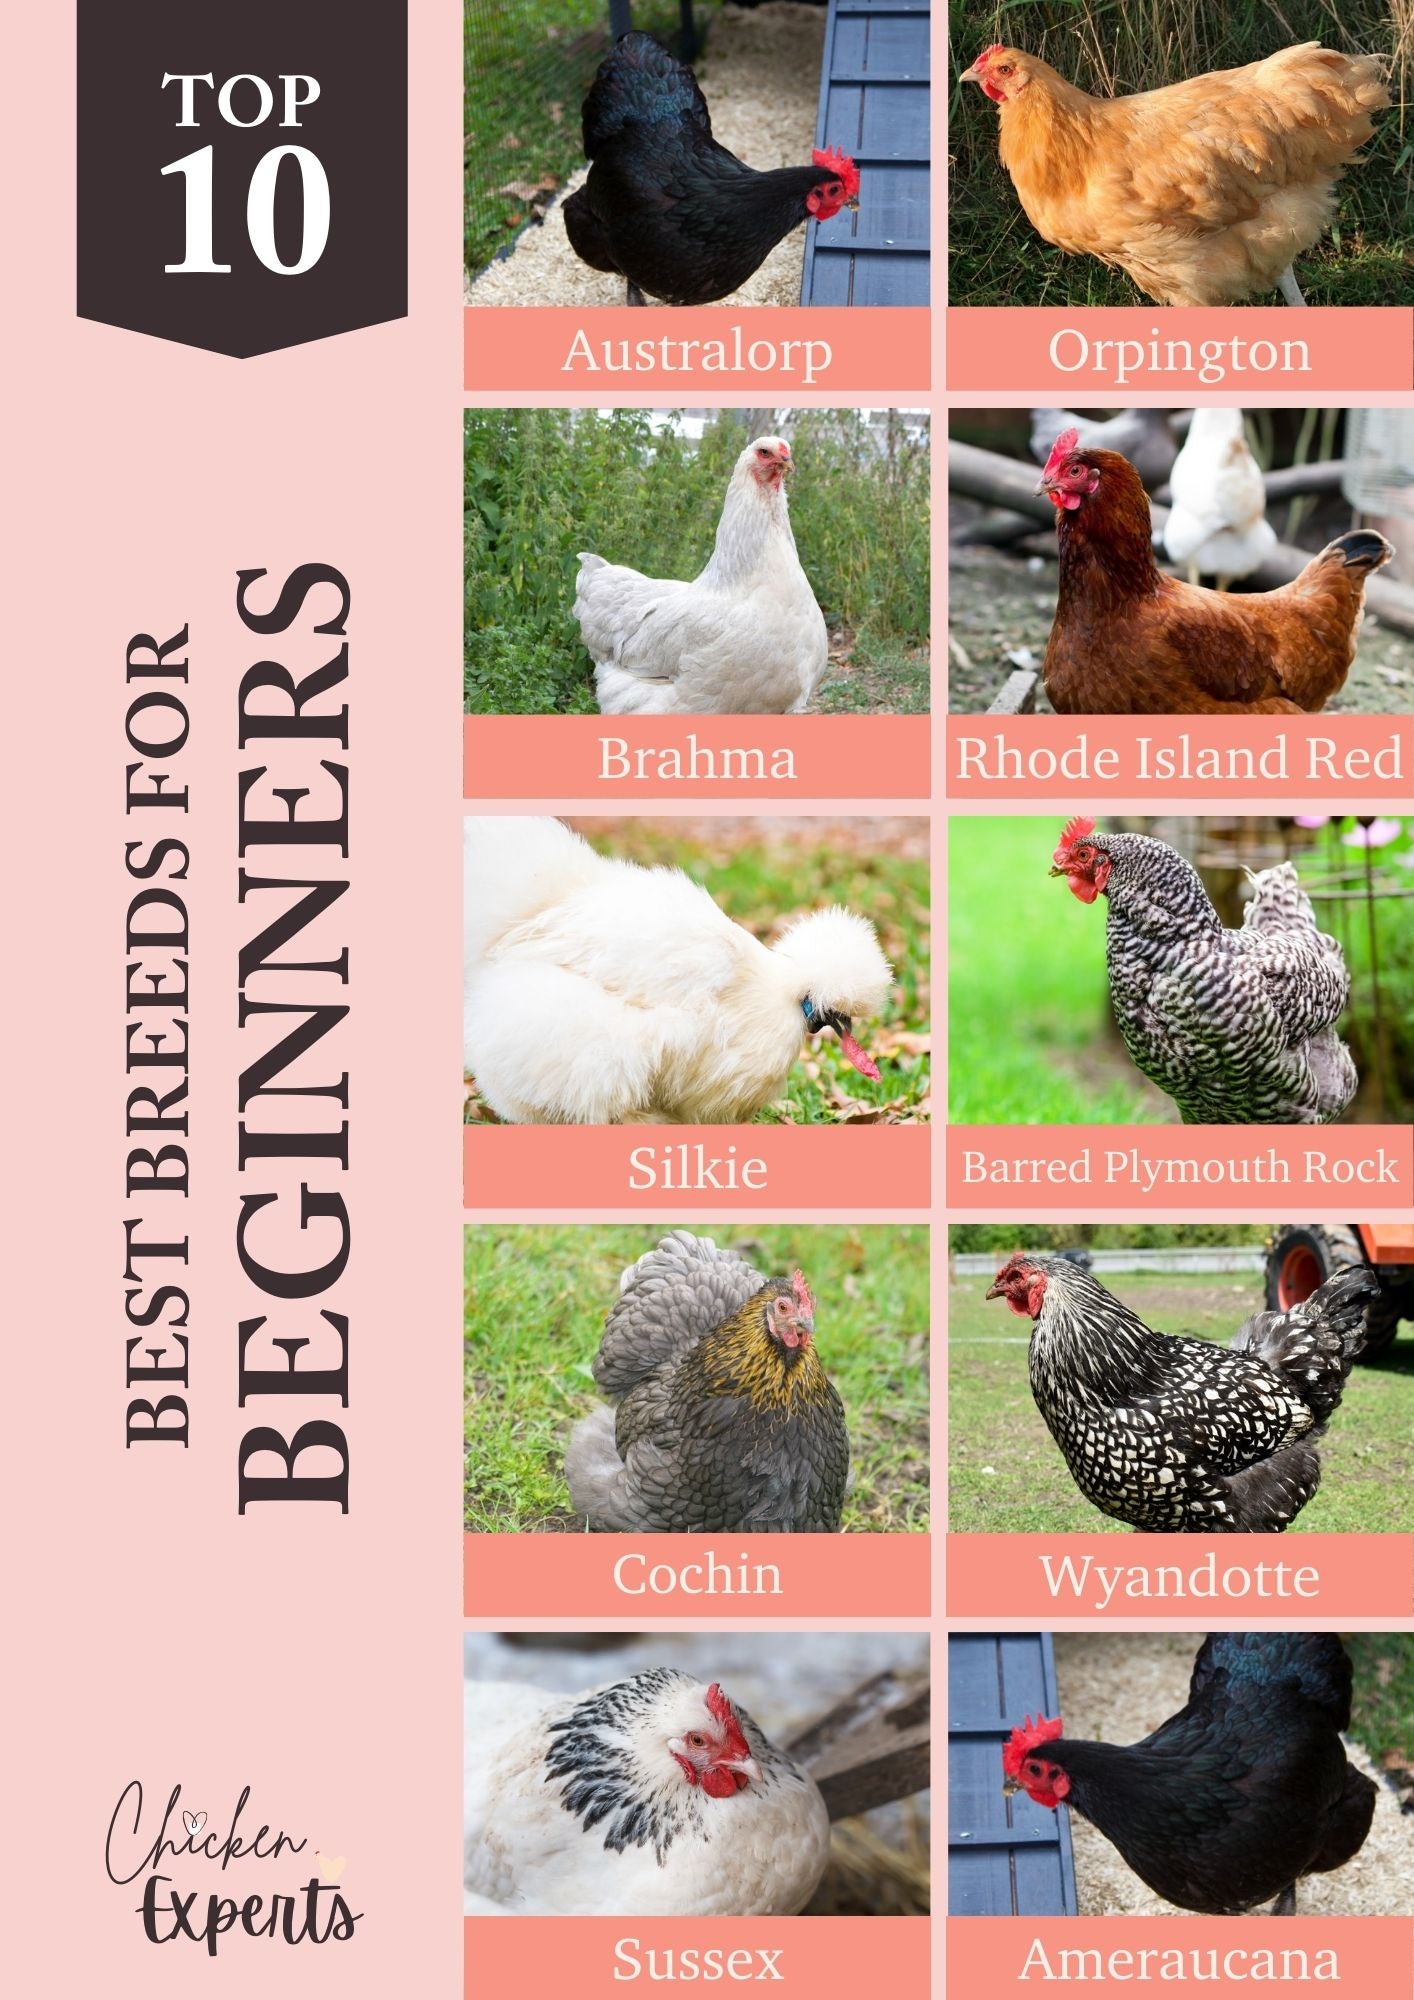 Backyard Chickens: An Ultimate Guide from the Experts! - chickenexperts